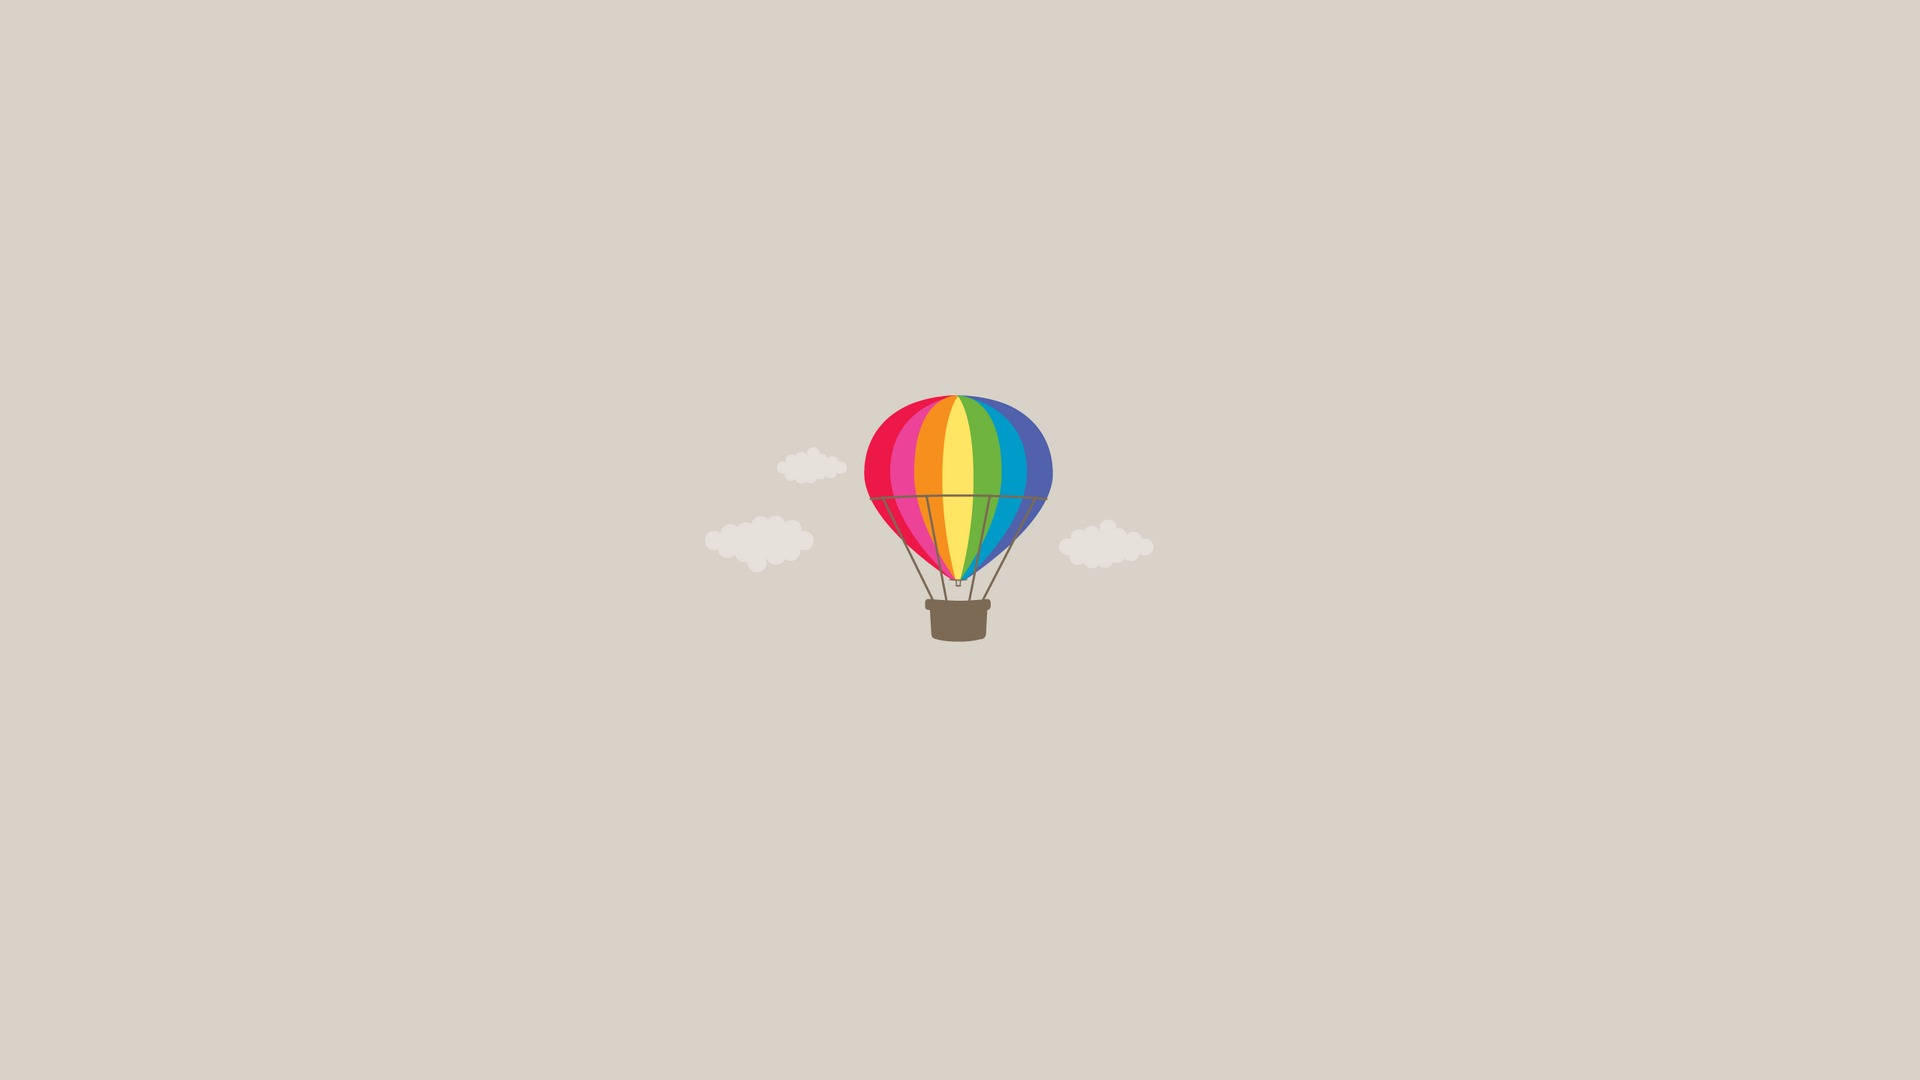 Minimalist Tablet Hot Air Balloon Picture